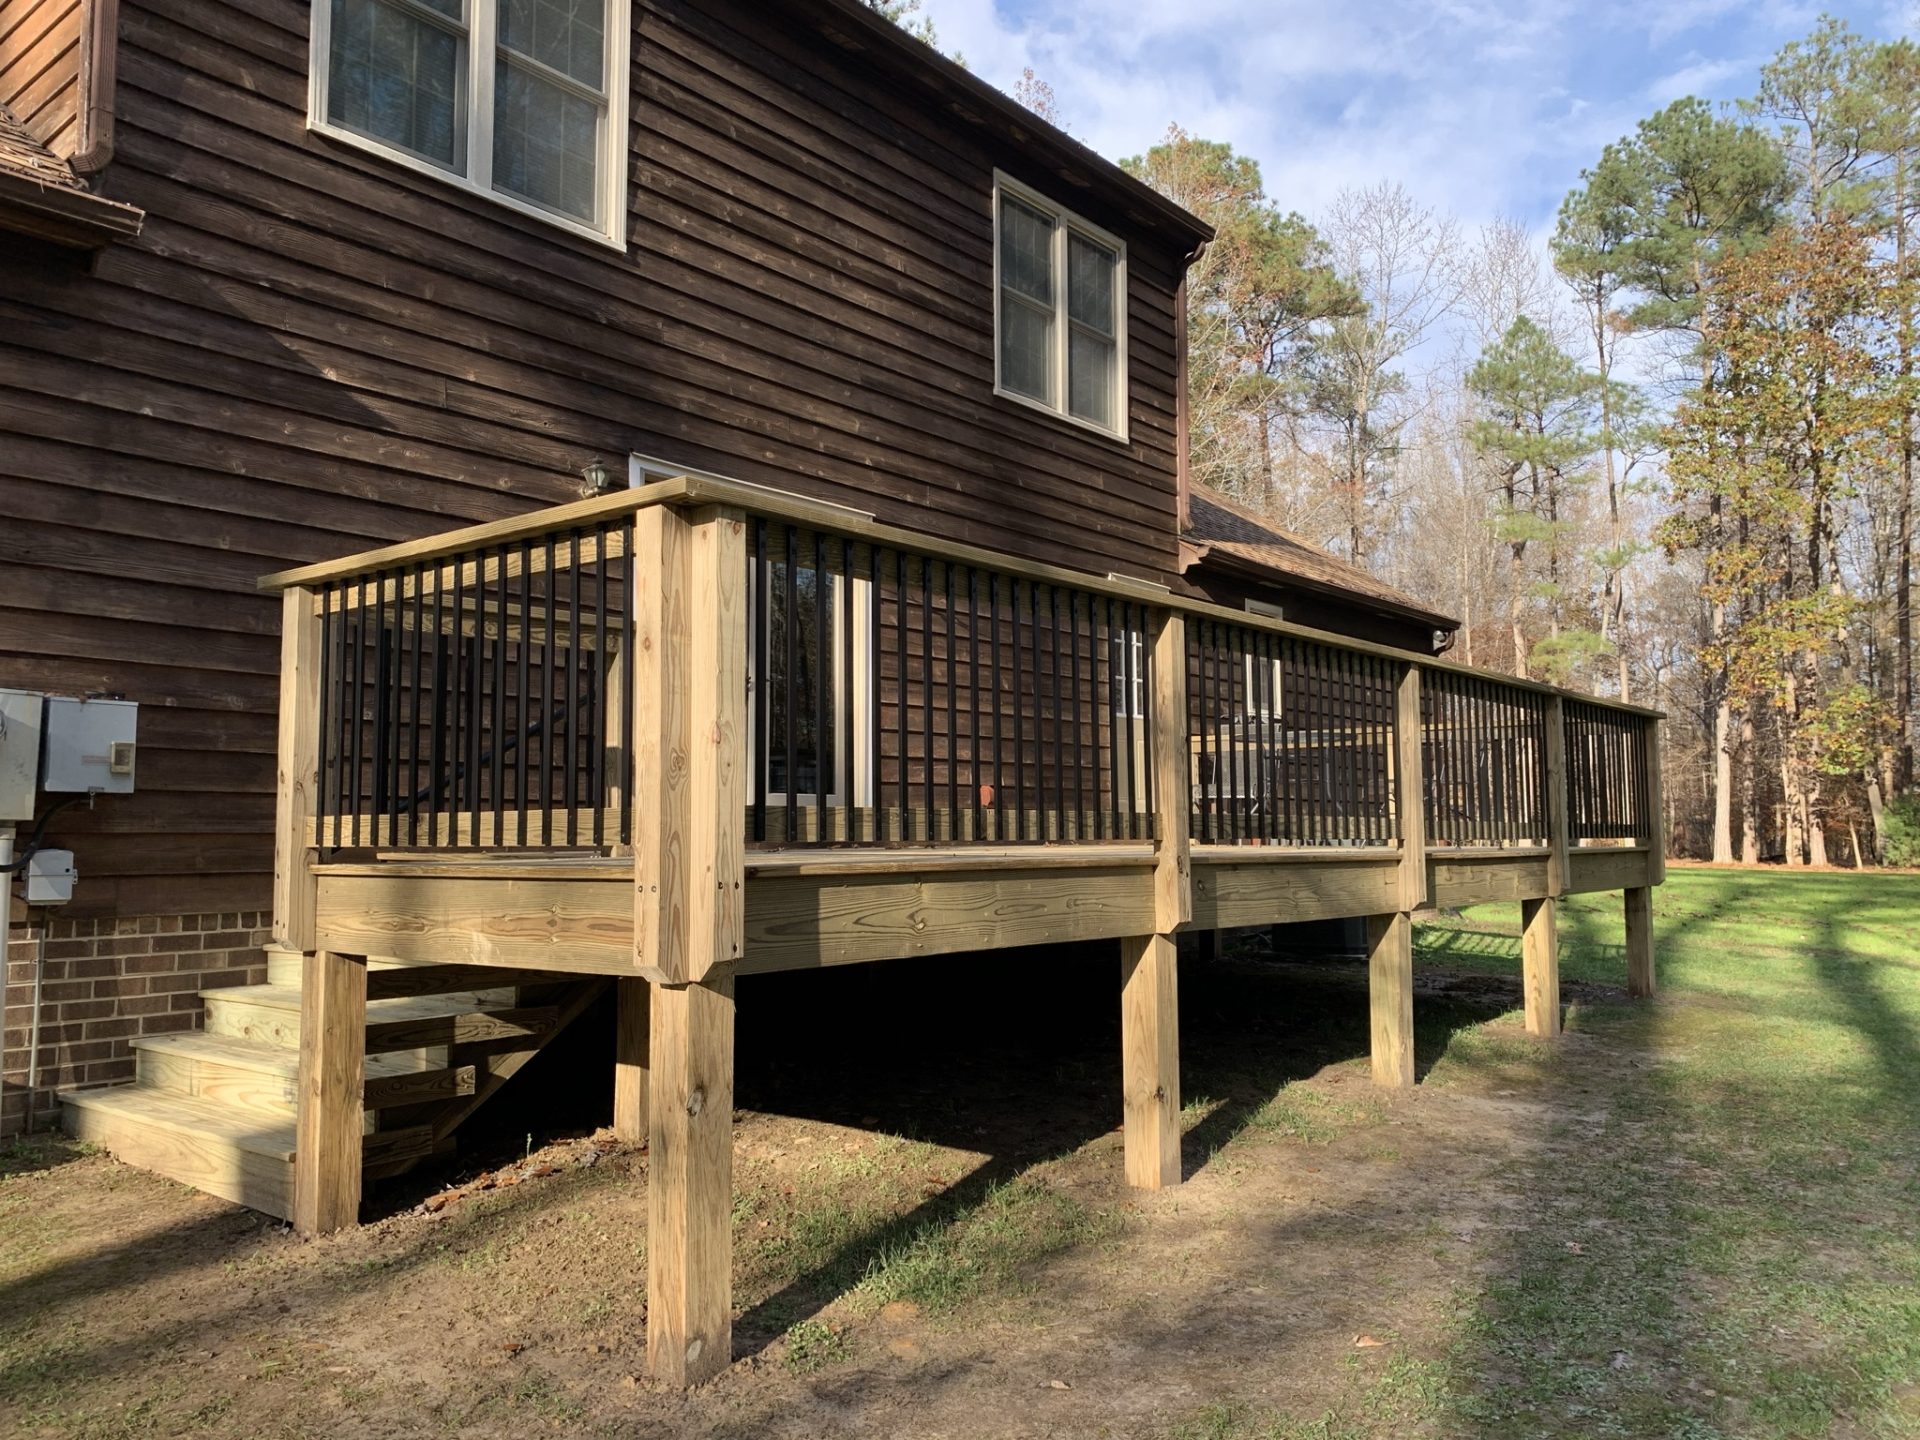 New deck with special railing